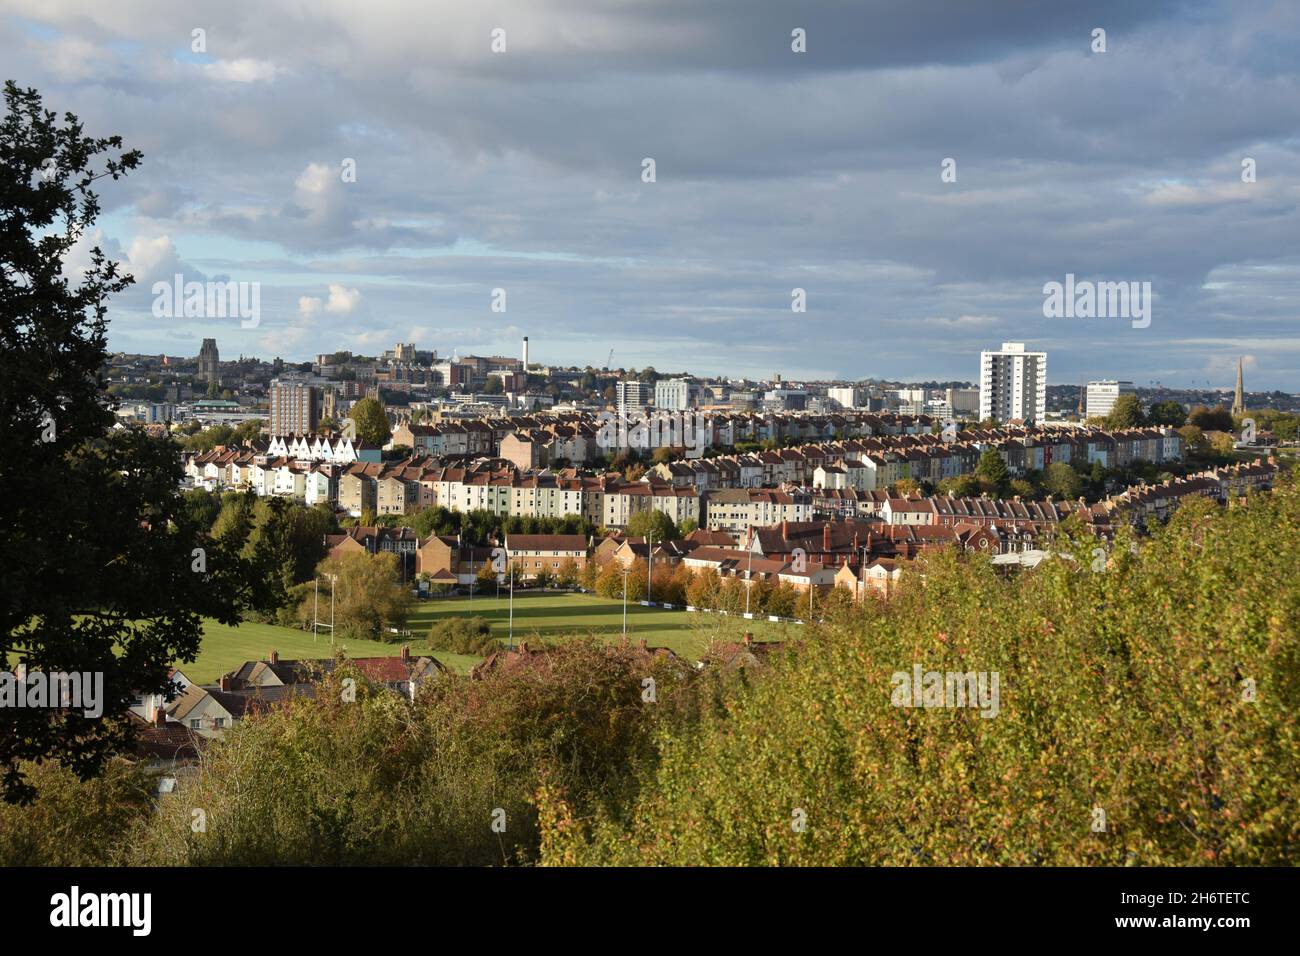 Cityscape of Bristol as seen from the Northern Slopes nature reserve.  Suburban terraces in foreground with skyline of city centre on the horizon Stock Photo